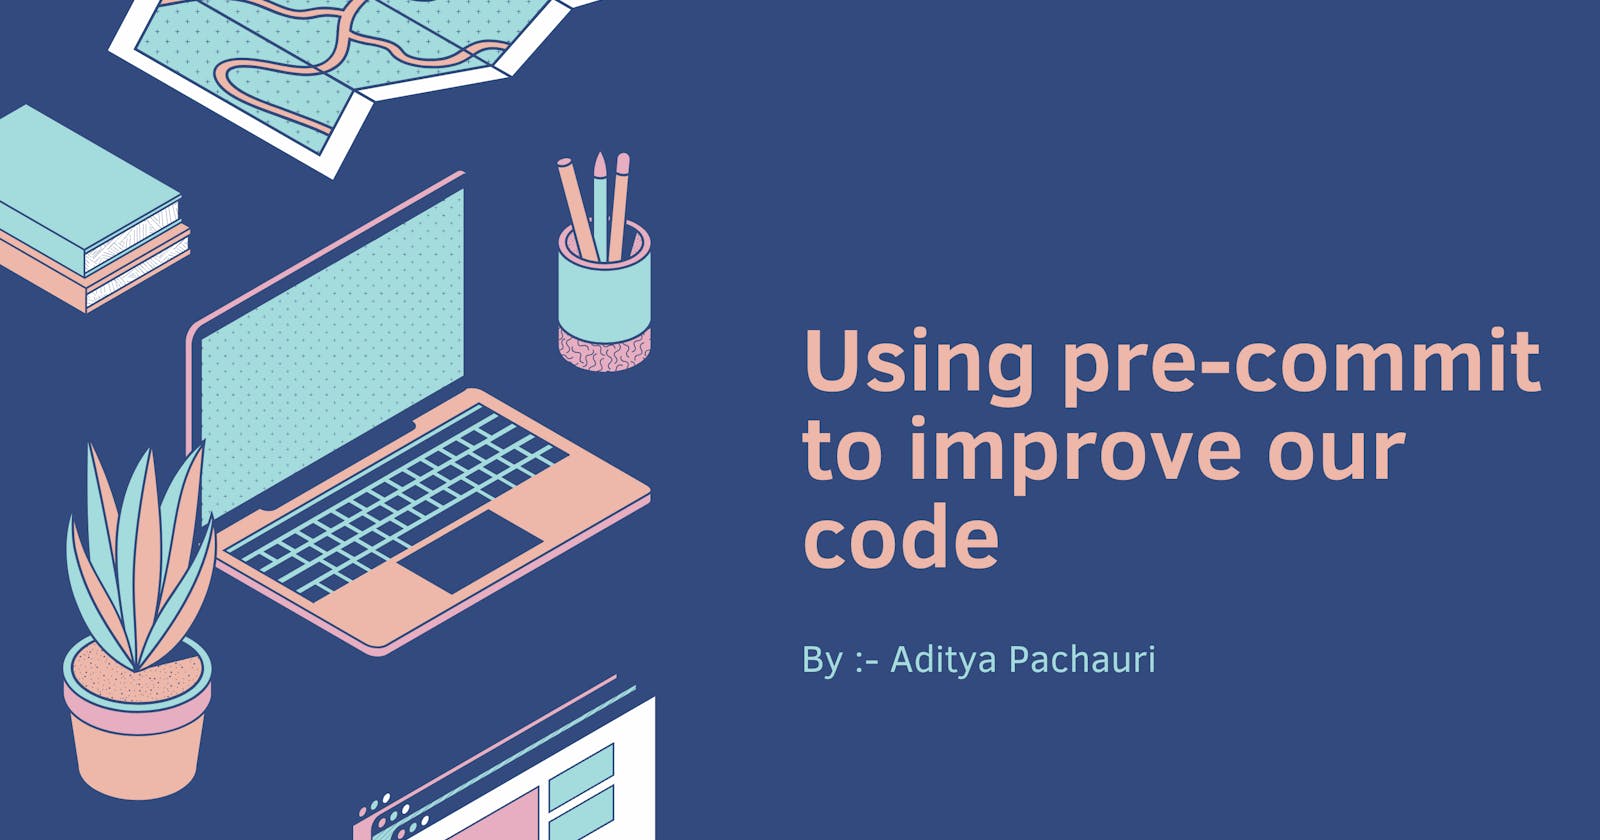 Using pre-commit to improve our code